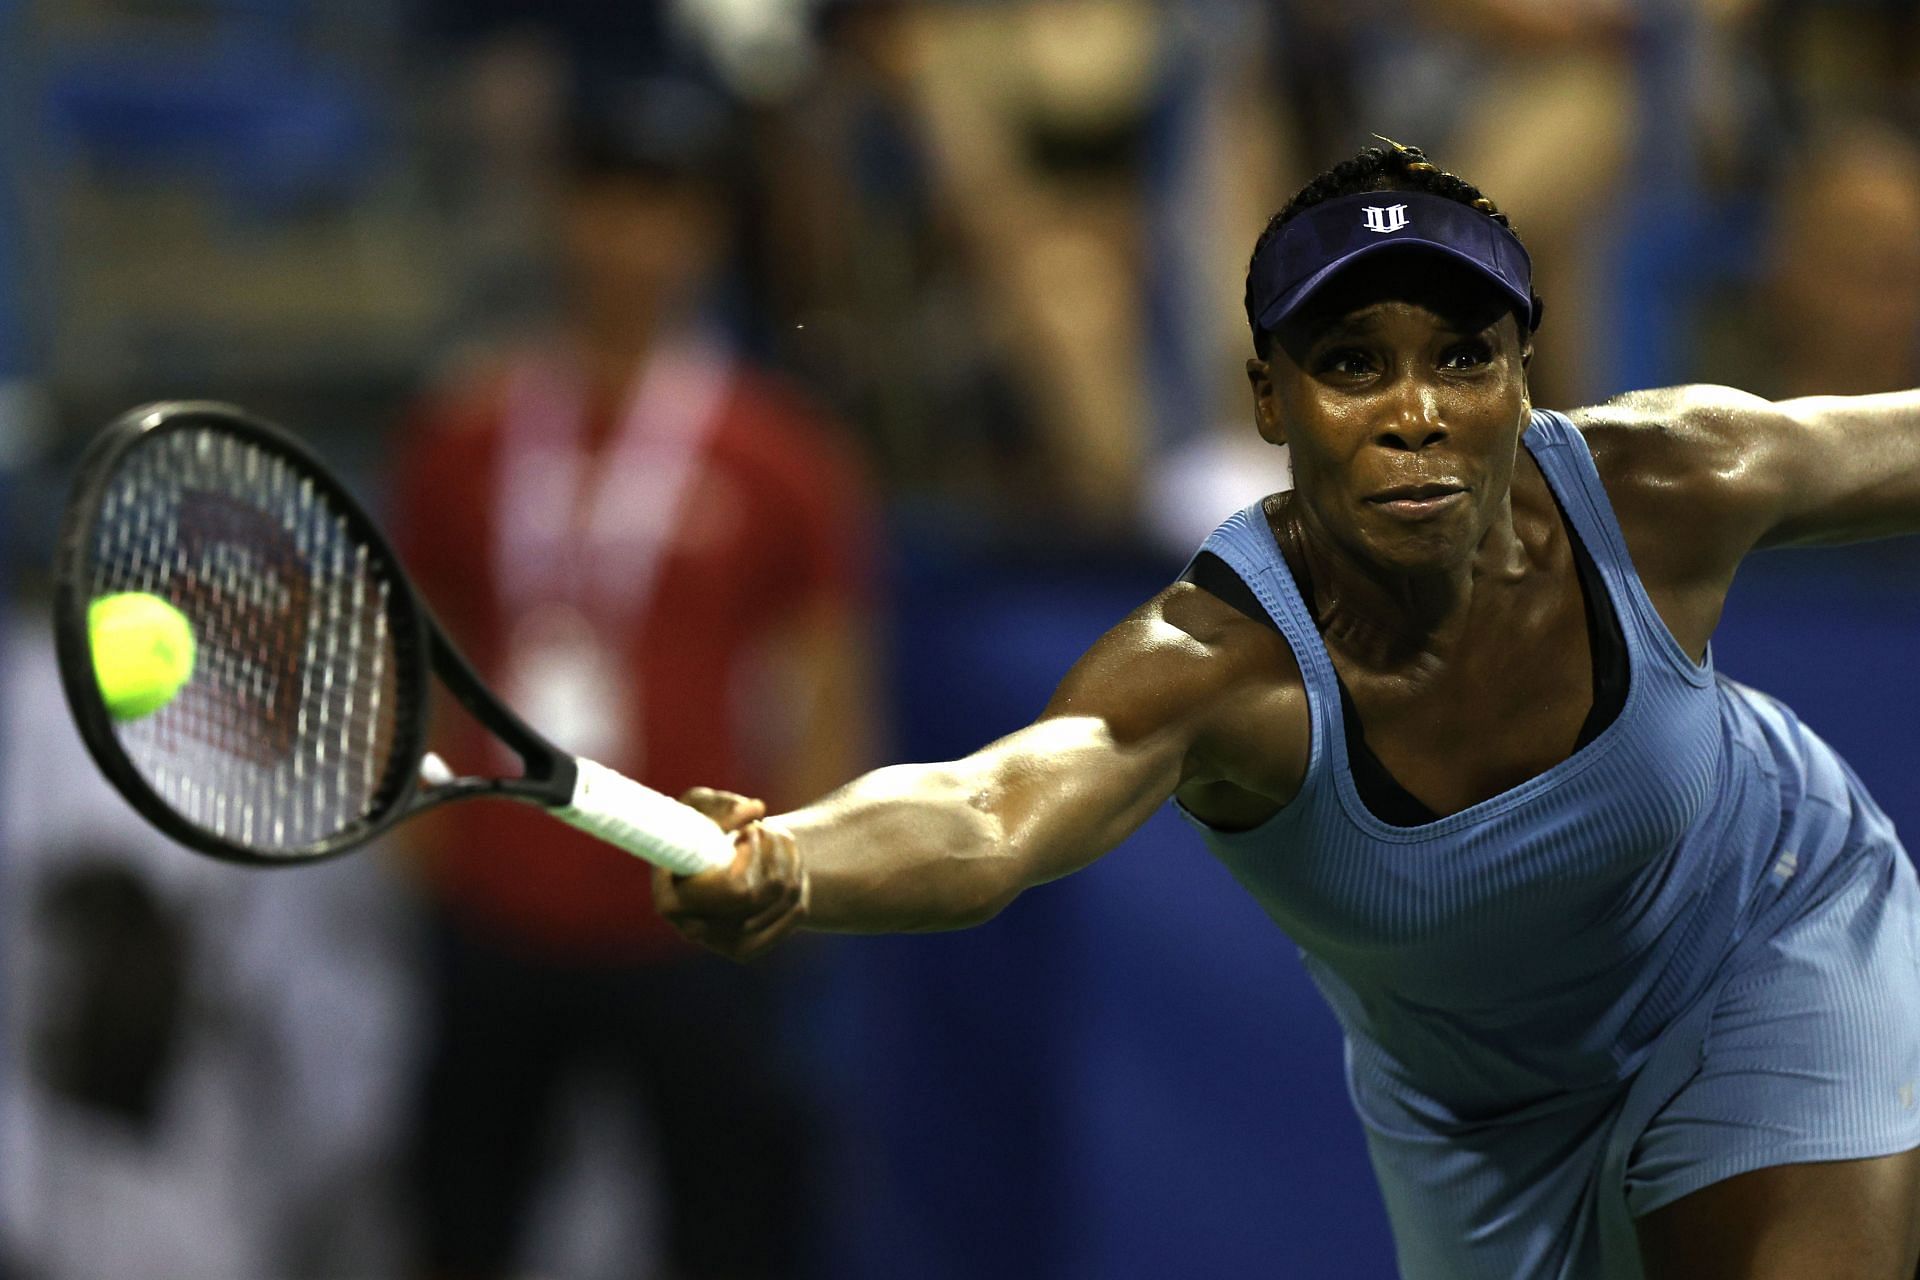 Venus Williams reaches for the ball in her match against Rebecca Marino at the Citi Open